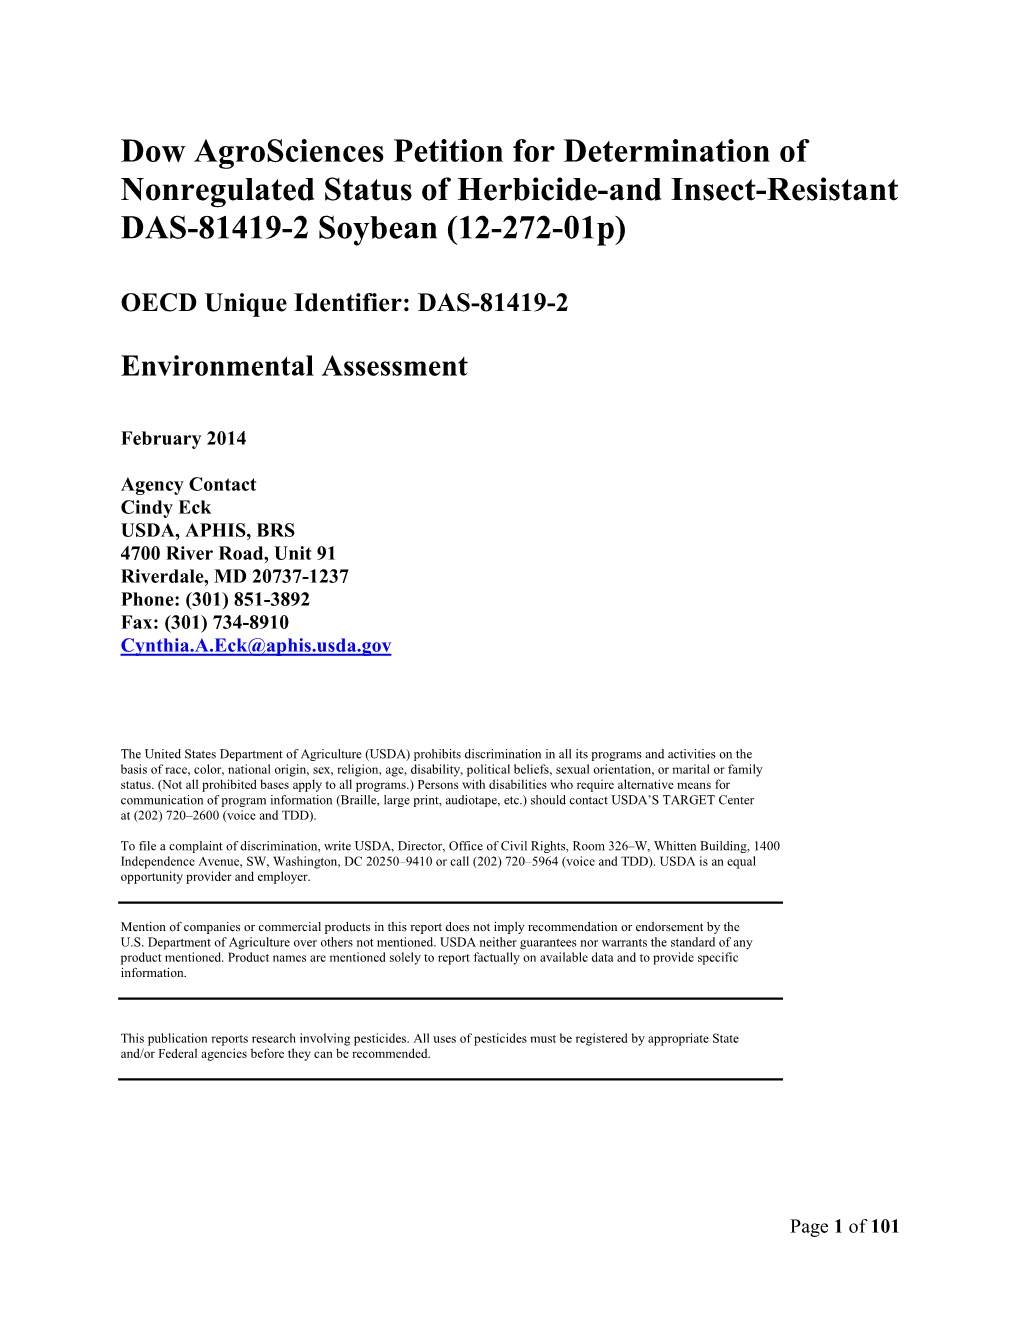 Dow Agrosciences Petition for Determination of Nonregulated Status of Herbicide-And Insect-Resistant DAS-81419-2 Soybean (12-272-01P)